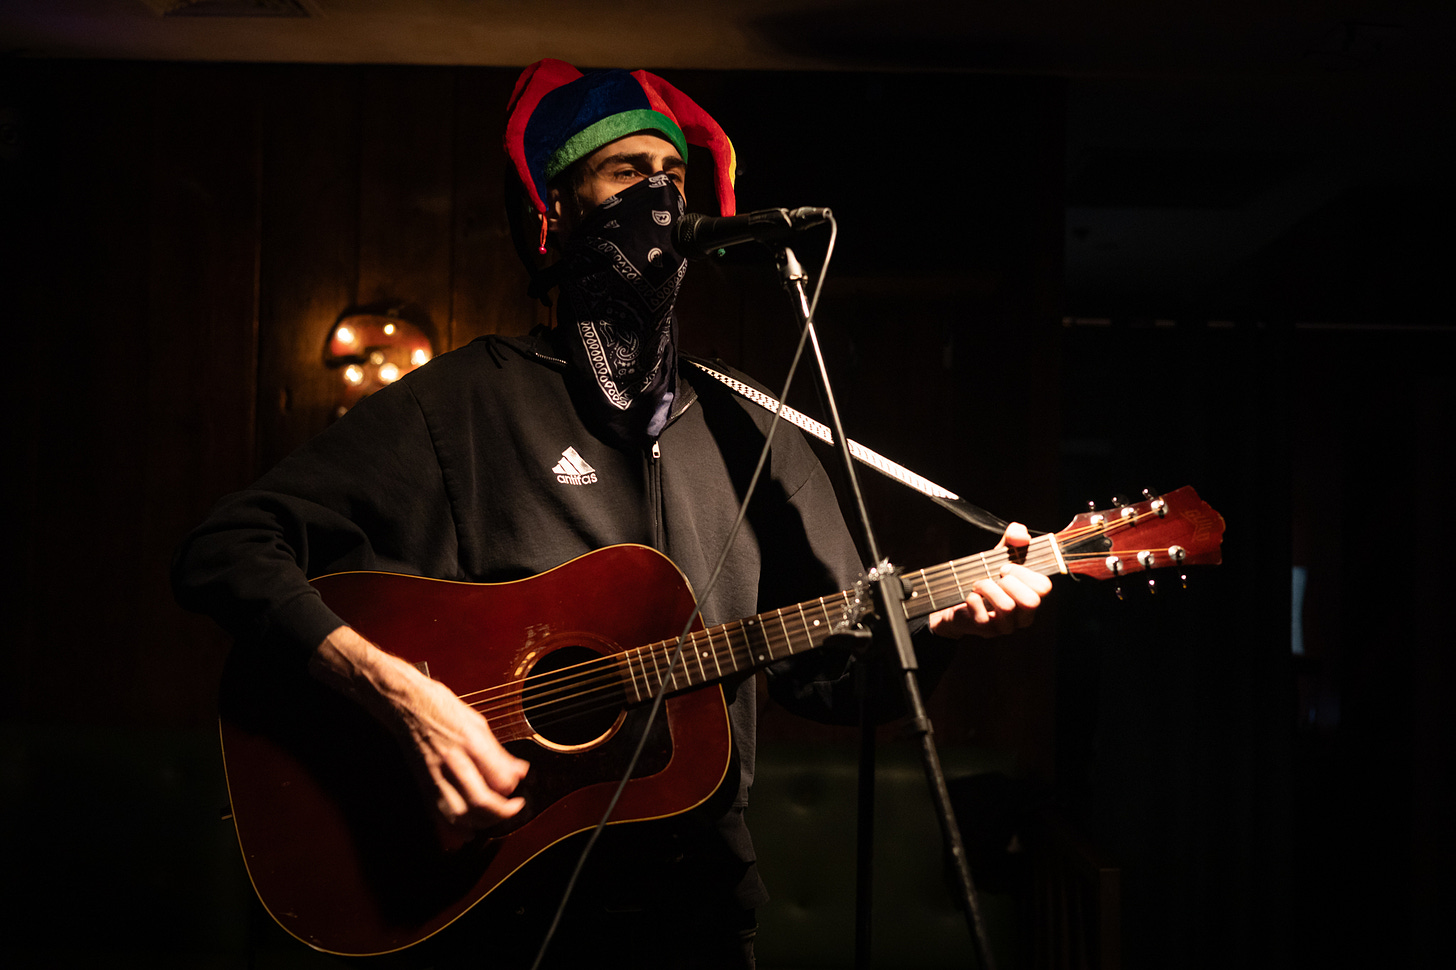 jester of no court performs with jester hat, acoustic guitar, and black bandana face mask at queers n peers variety show